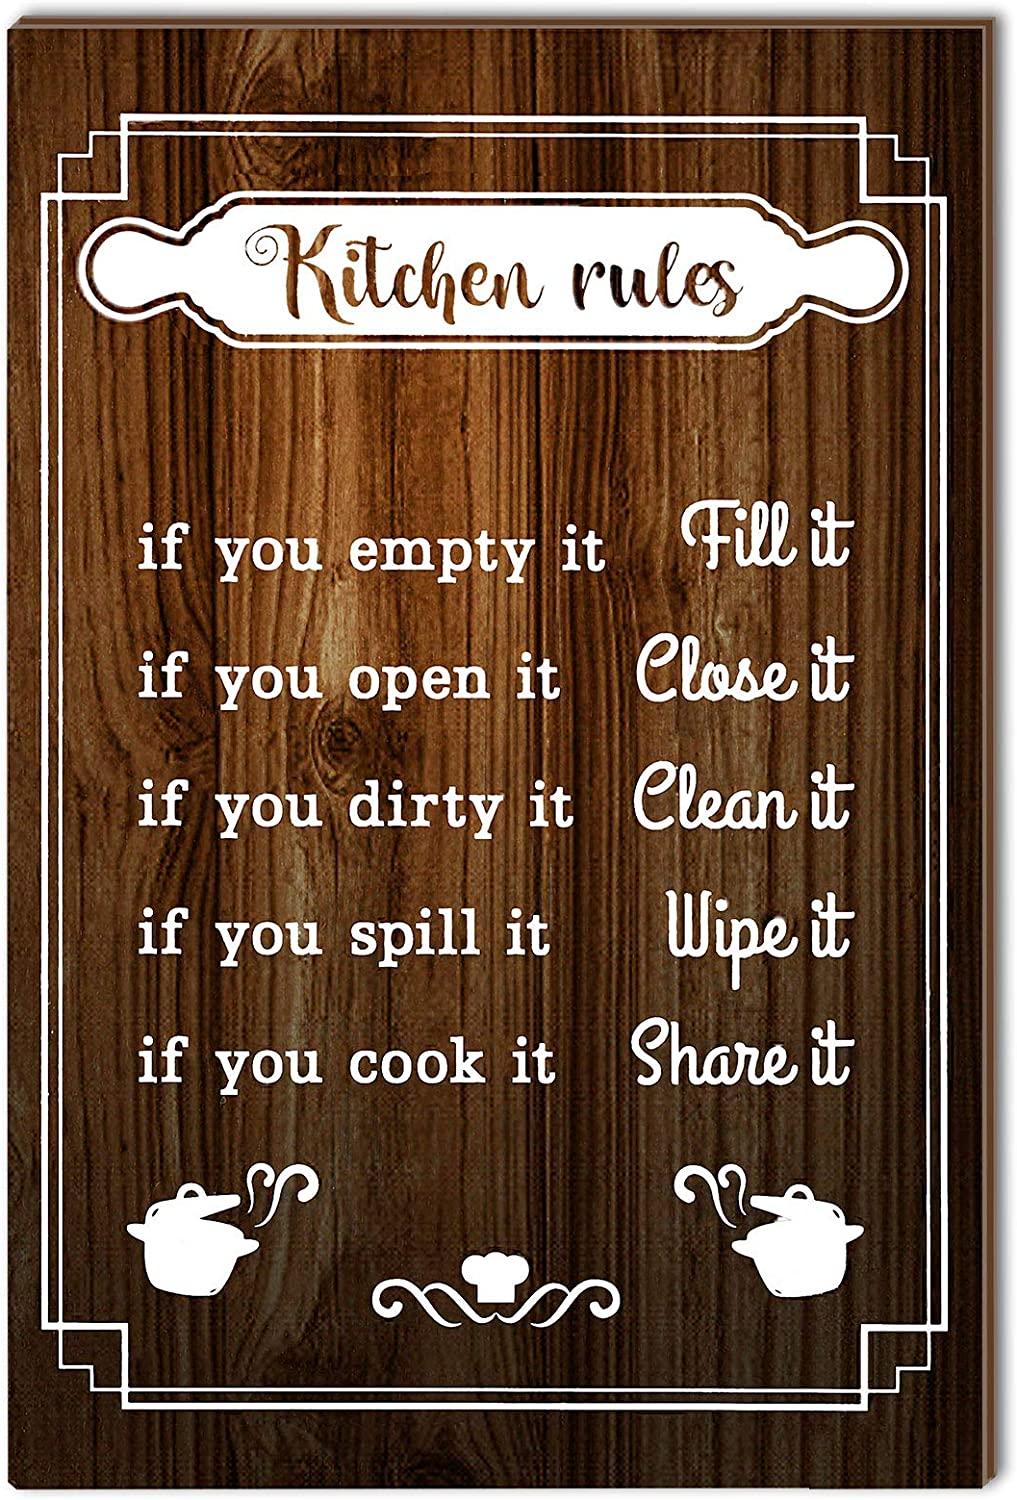 Funny Kitchen Quote If I Have To Stir It It's Homemade Wood Plaque Sign  Wall Hanging Retro Kitchen Signs with Sayings for Home Decor Gifts